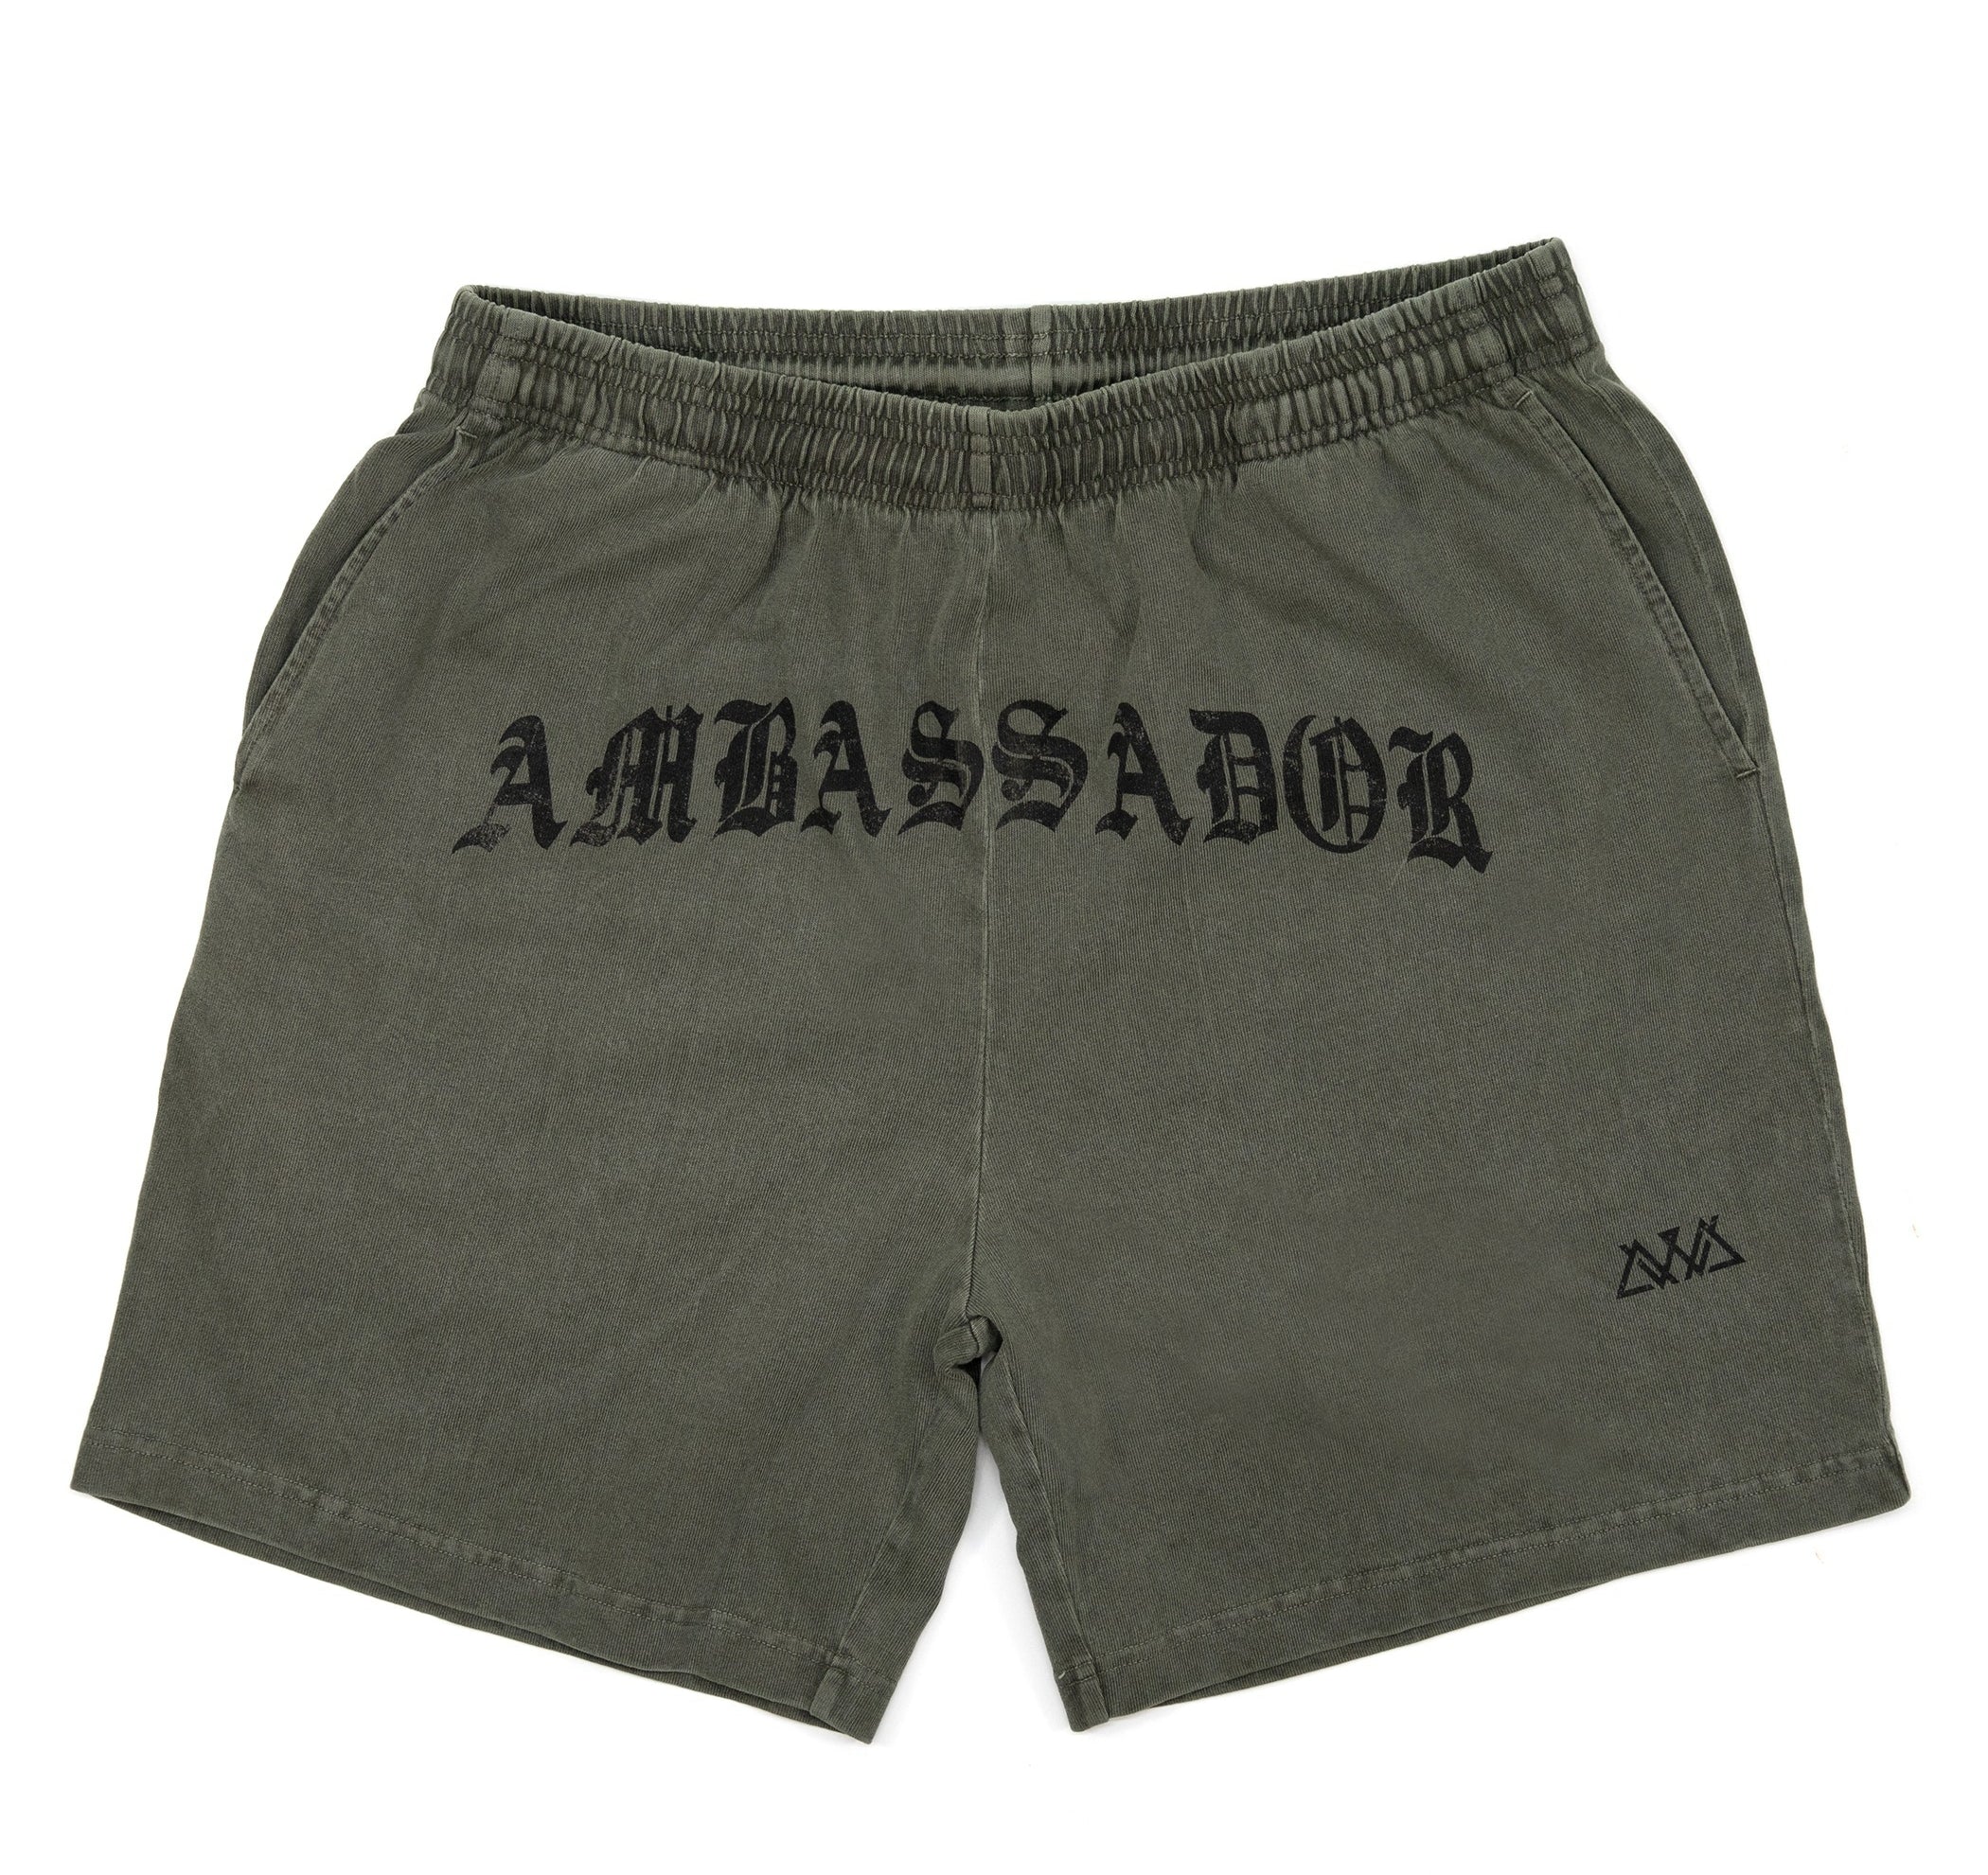 FRONT VIEW OF KHAKI PIGMENT DYED HILO SHORT WITH LARGE AMBASSADOR LOGO IN THE MIDDLE IN OLD ENGLISH WRITING WITH SMALL AVVA LOGO ON LEFT LEG. 